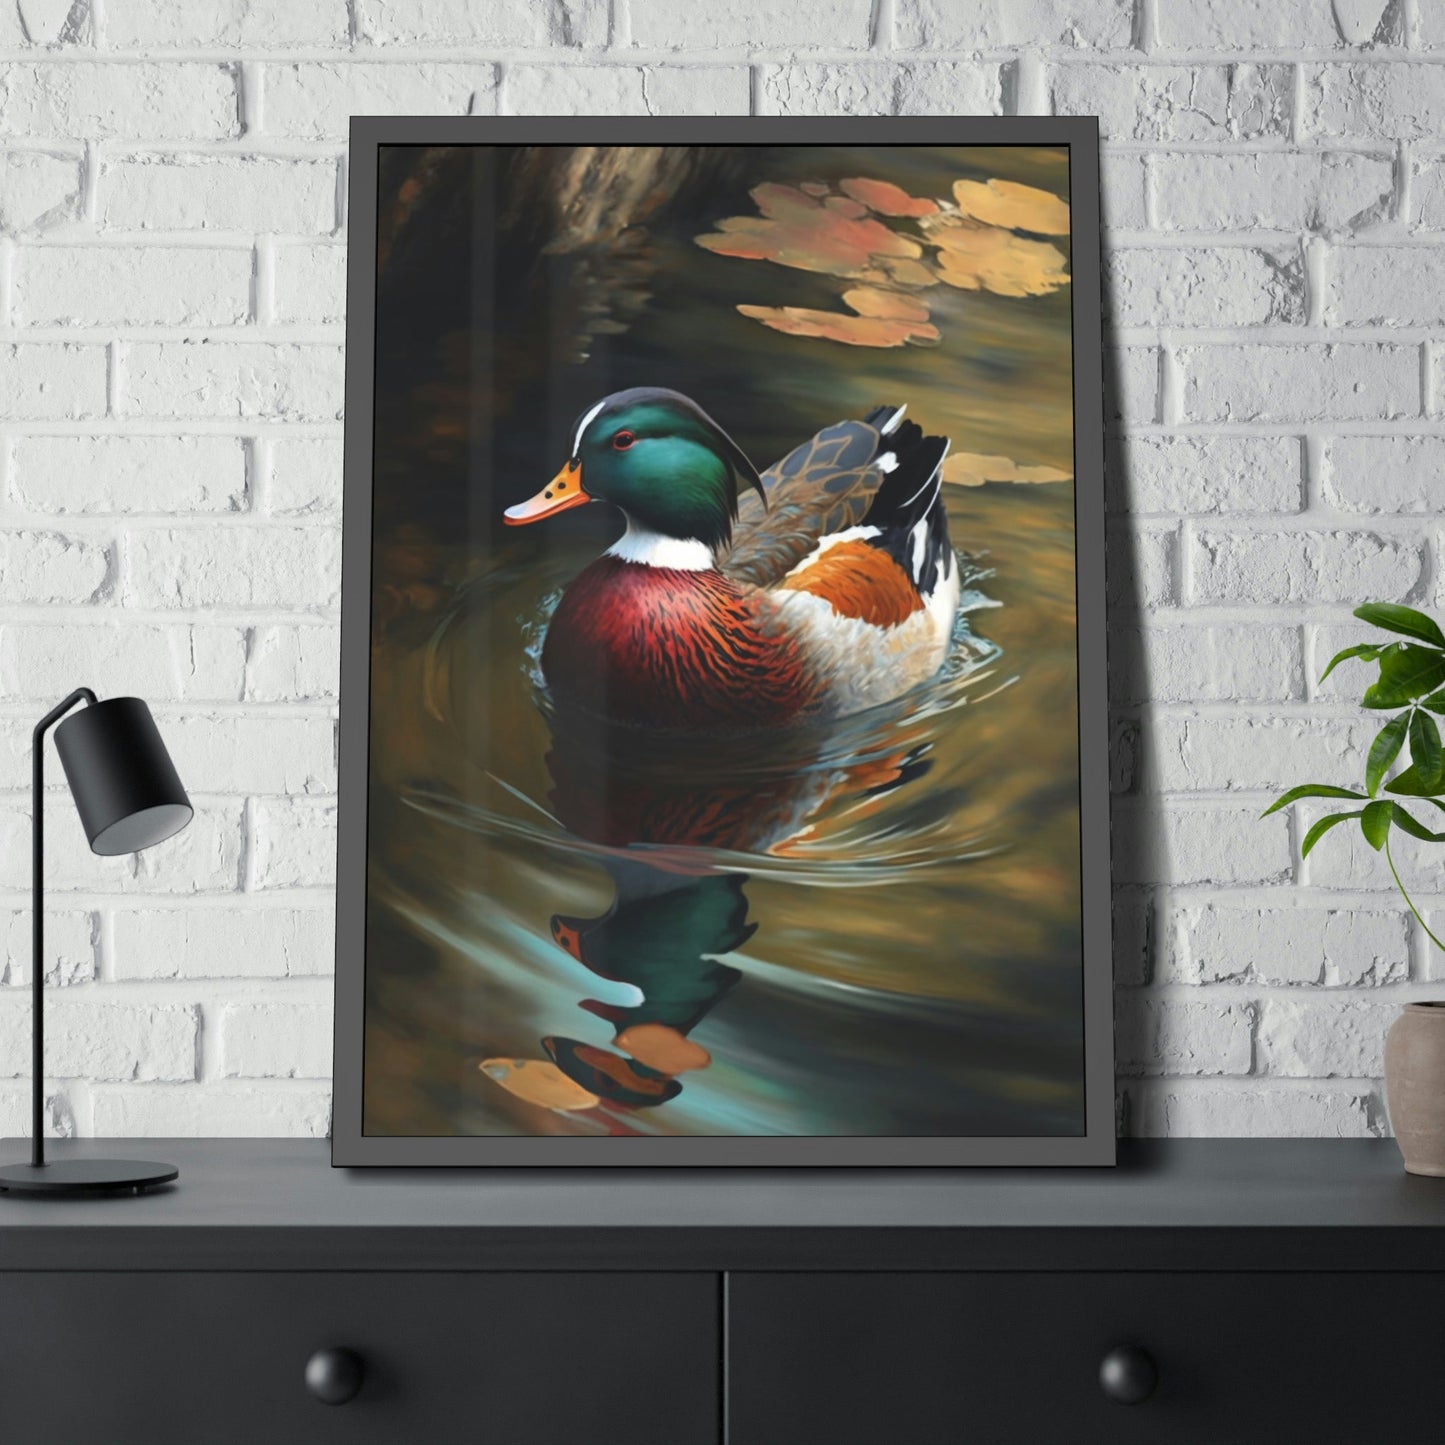 Reflections of Nature: An Artistic Rendering of Ducks